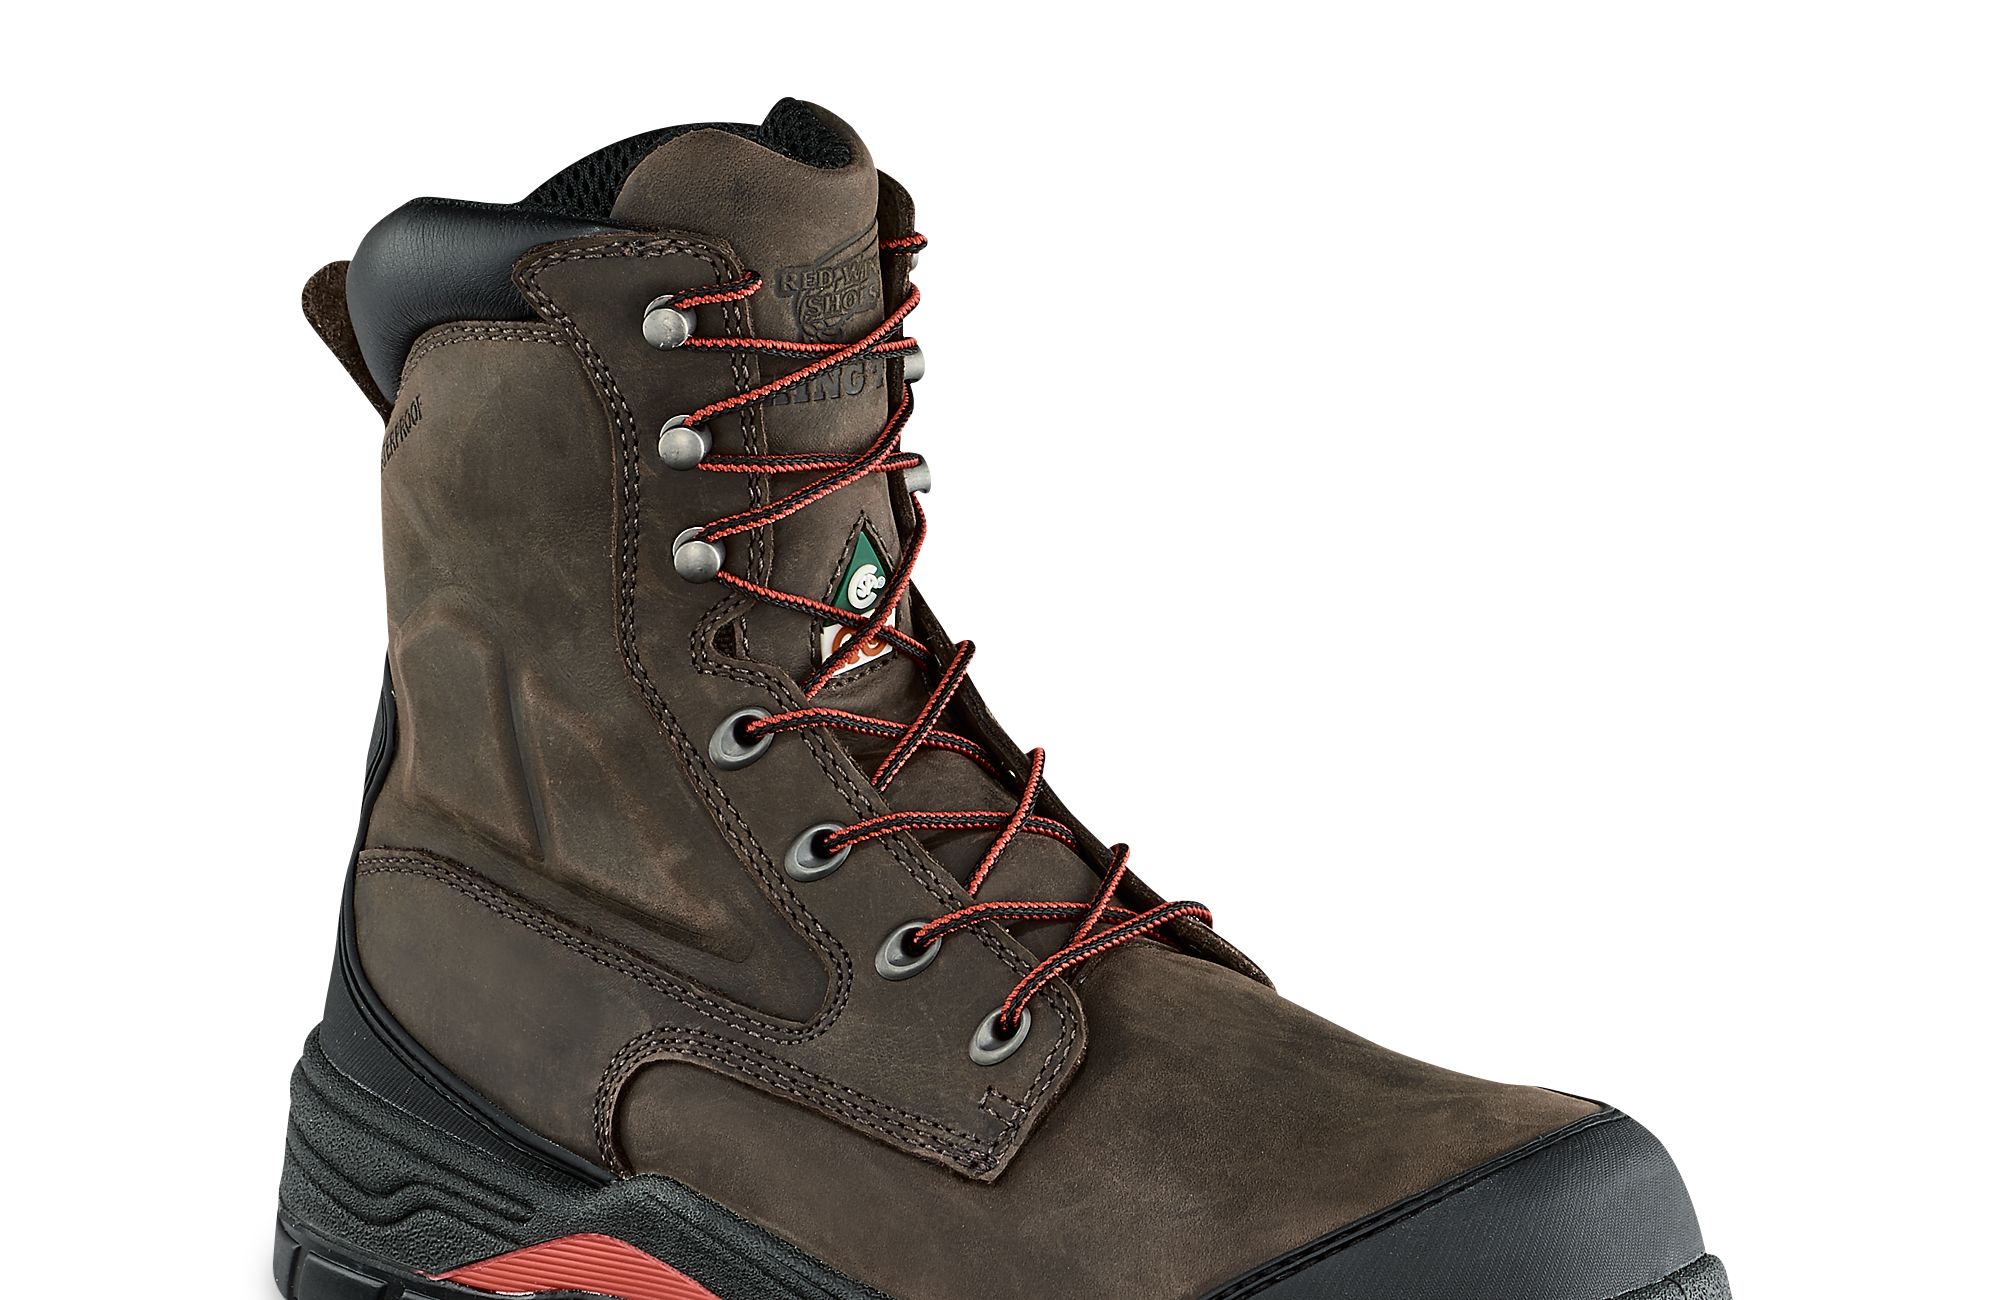 3000 gram thinsulate work boots,Save up to 17%,www.ilcascinone.com